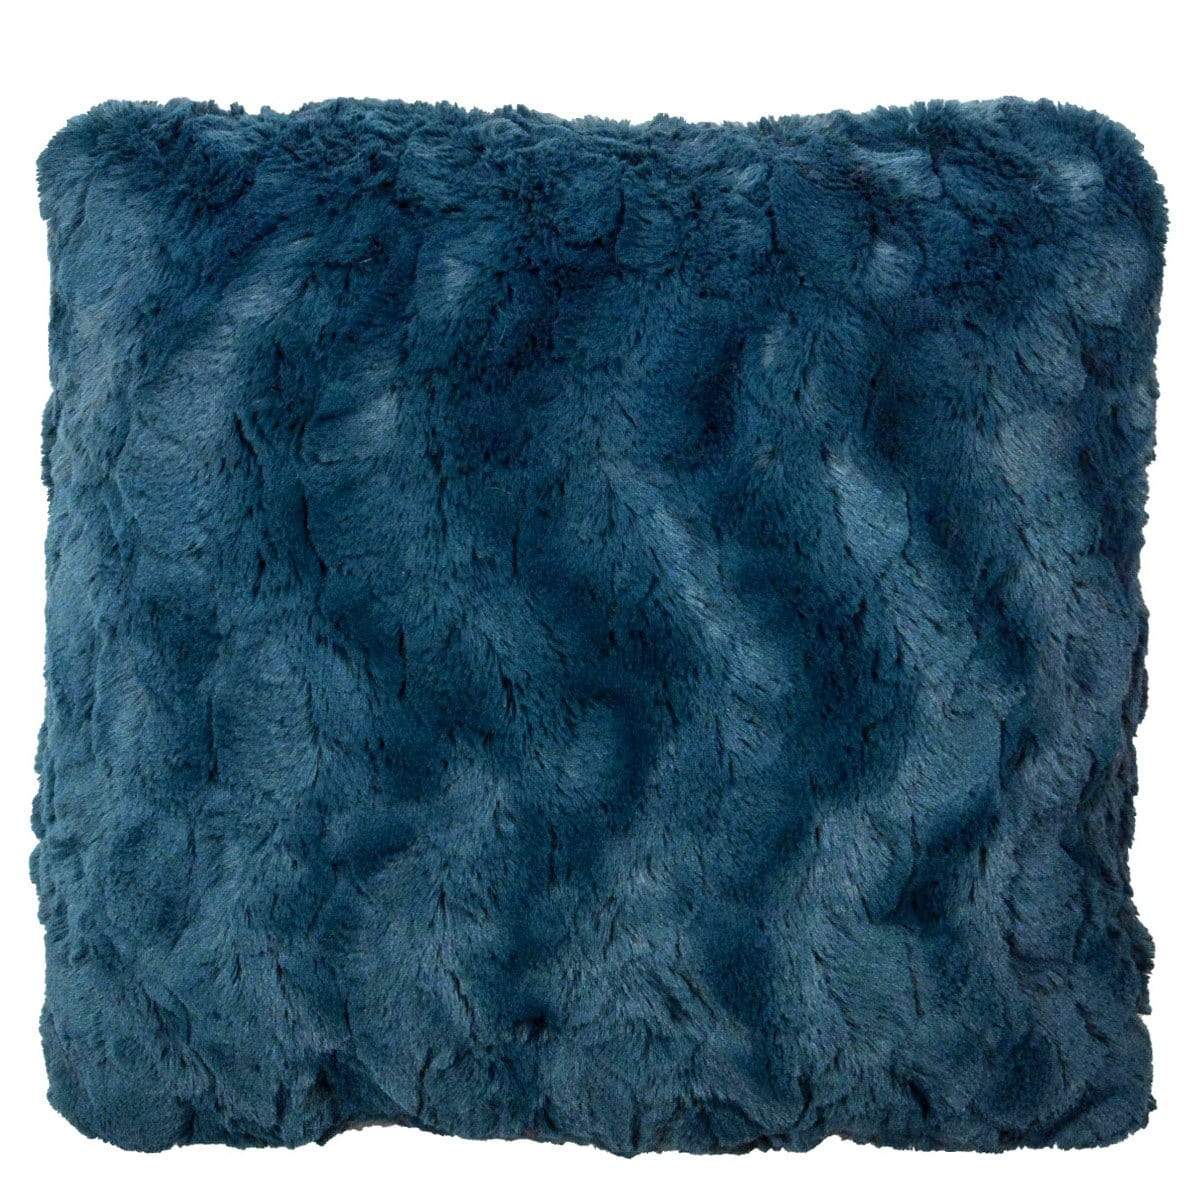  product shot of Pillow Shams in Peacock Pond | Luxury Faux Fur decorative pillow Blue | Handmade by Pandemonium Millinery